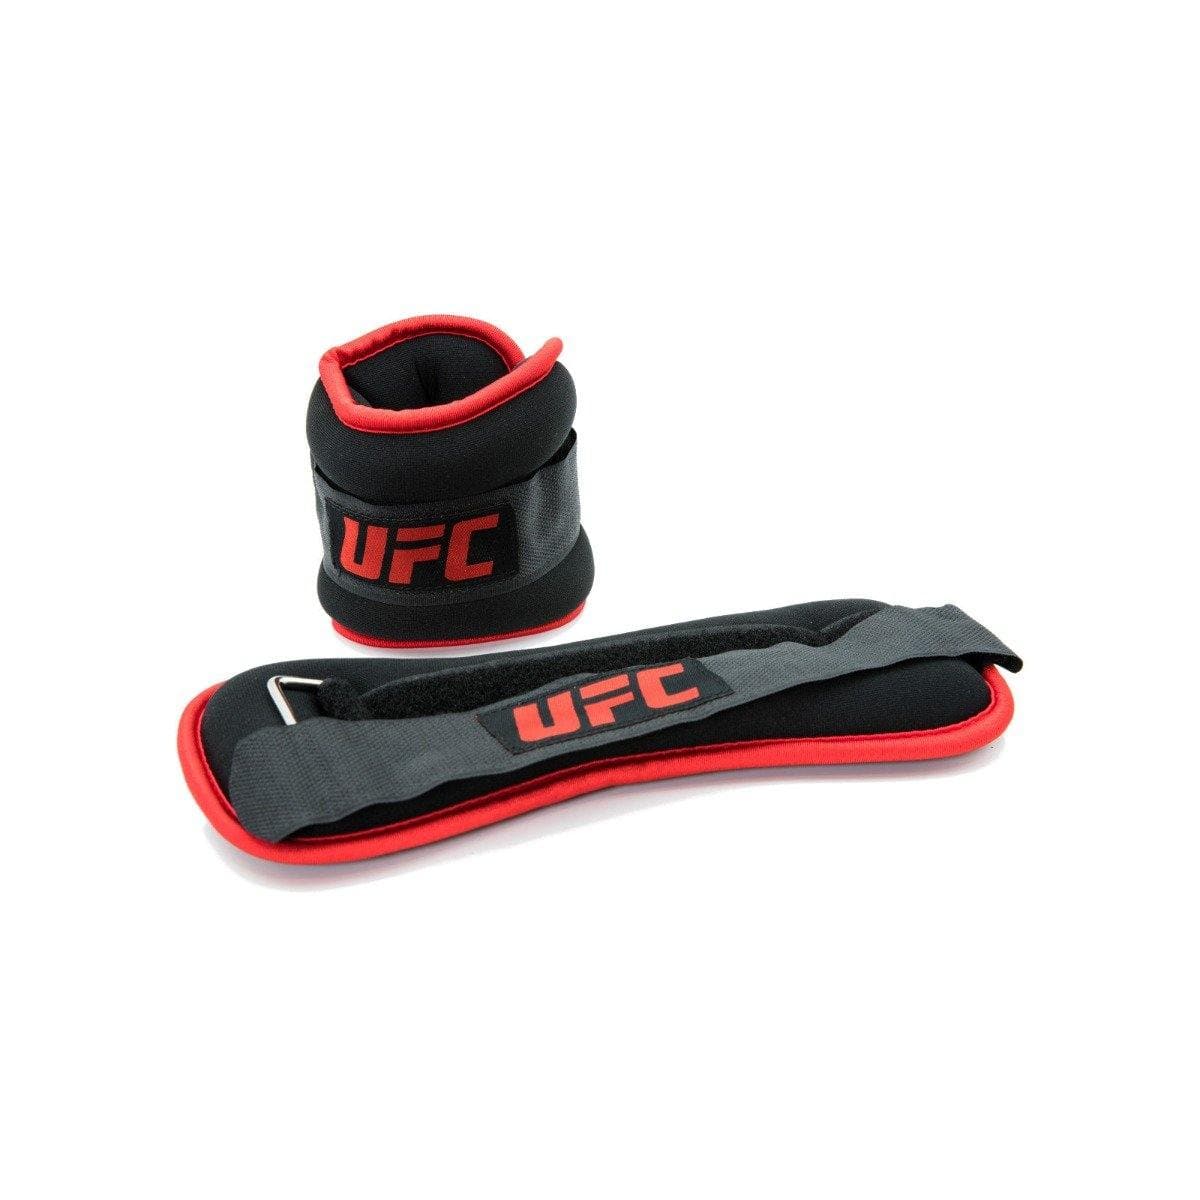 UFC Ankle Weights 2 x 0.5kg  - Contact Us for Professionals Discount Pricing. - Musclemania Fitness MegaStore